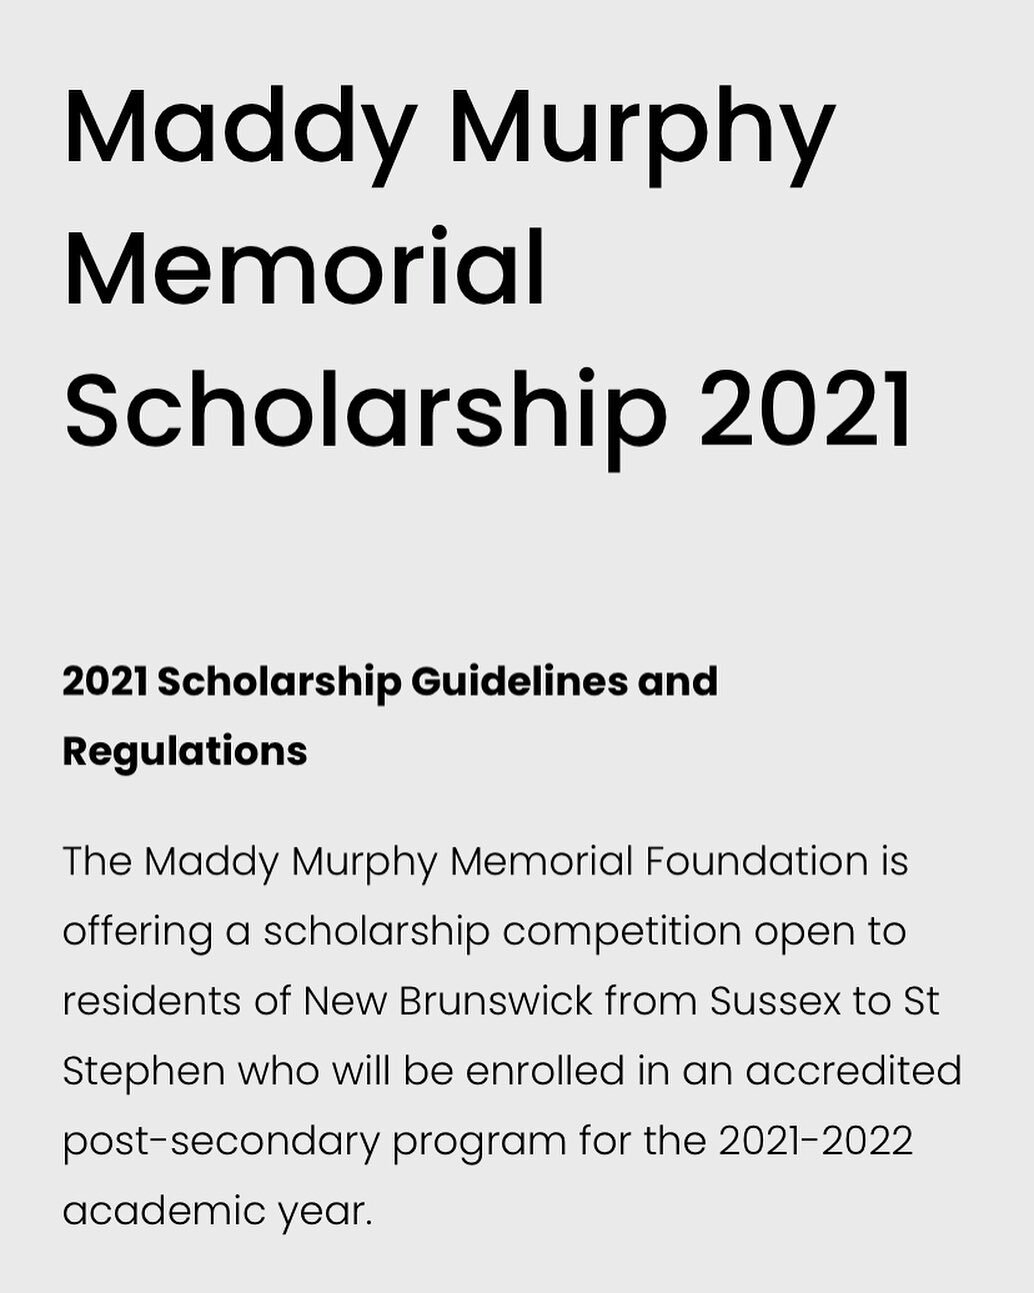 ‼️Attention ‼️ Head on over to our website and find all of our details for the 2021-2022 scholarship guidelines. The guidelines can be found using the link attached: https://www.maddymurphymemorialpage.com/blog/maddy-murphy-memorial-scholarship-2021